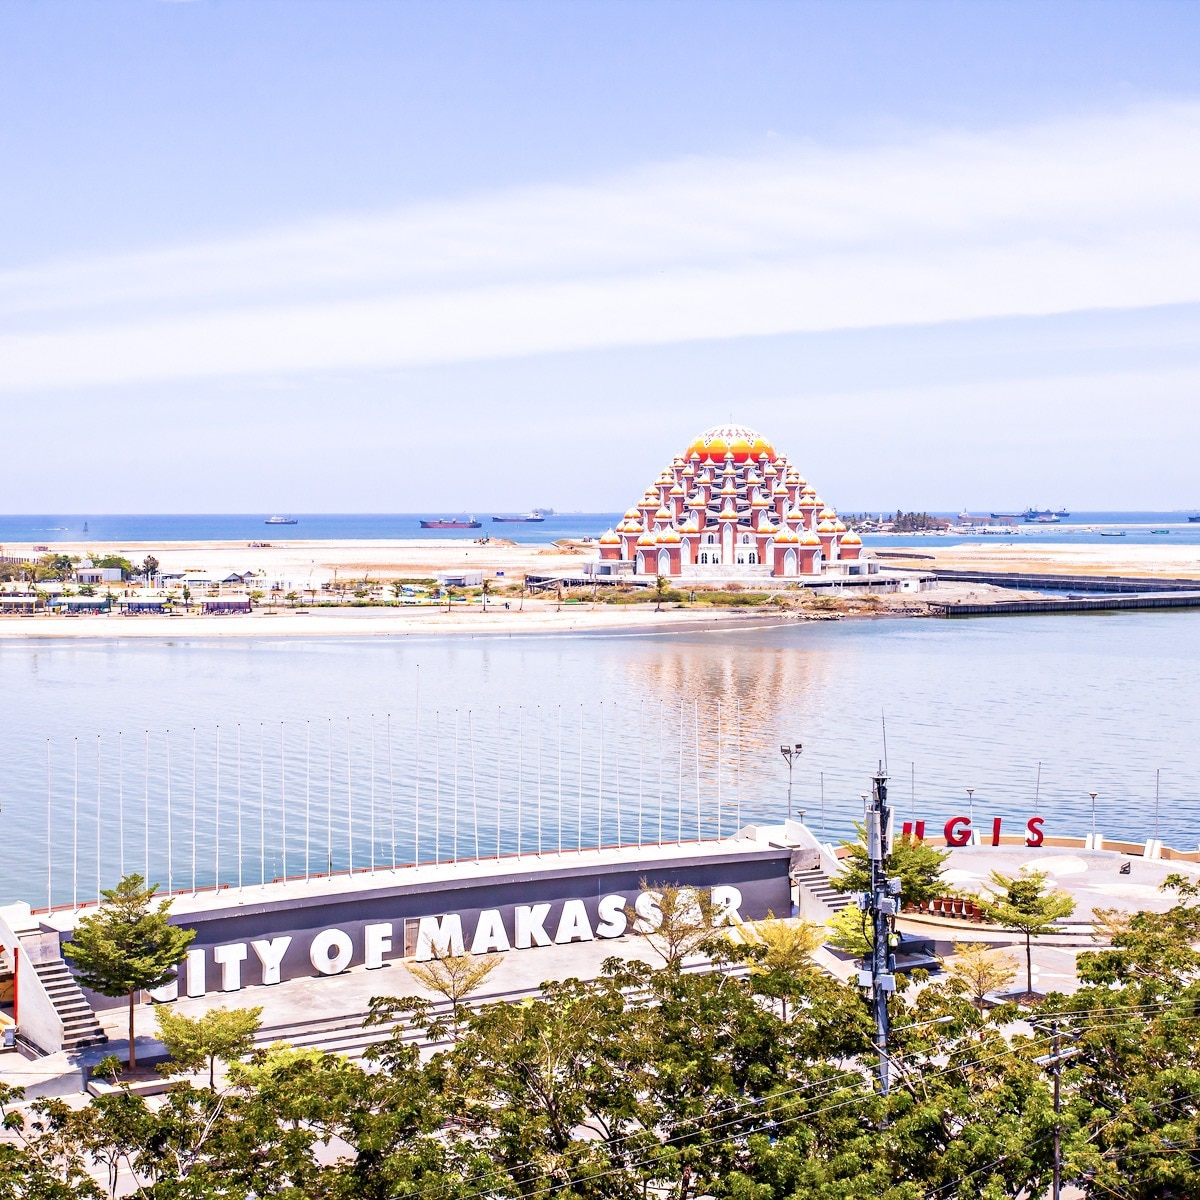 What can you find in Makassar? Browse the info here - Indonesia Travel